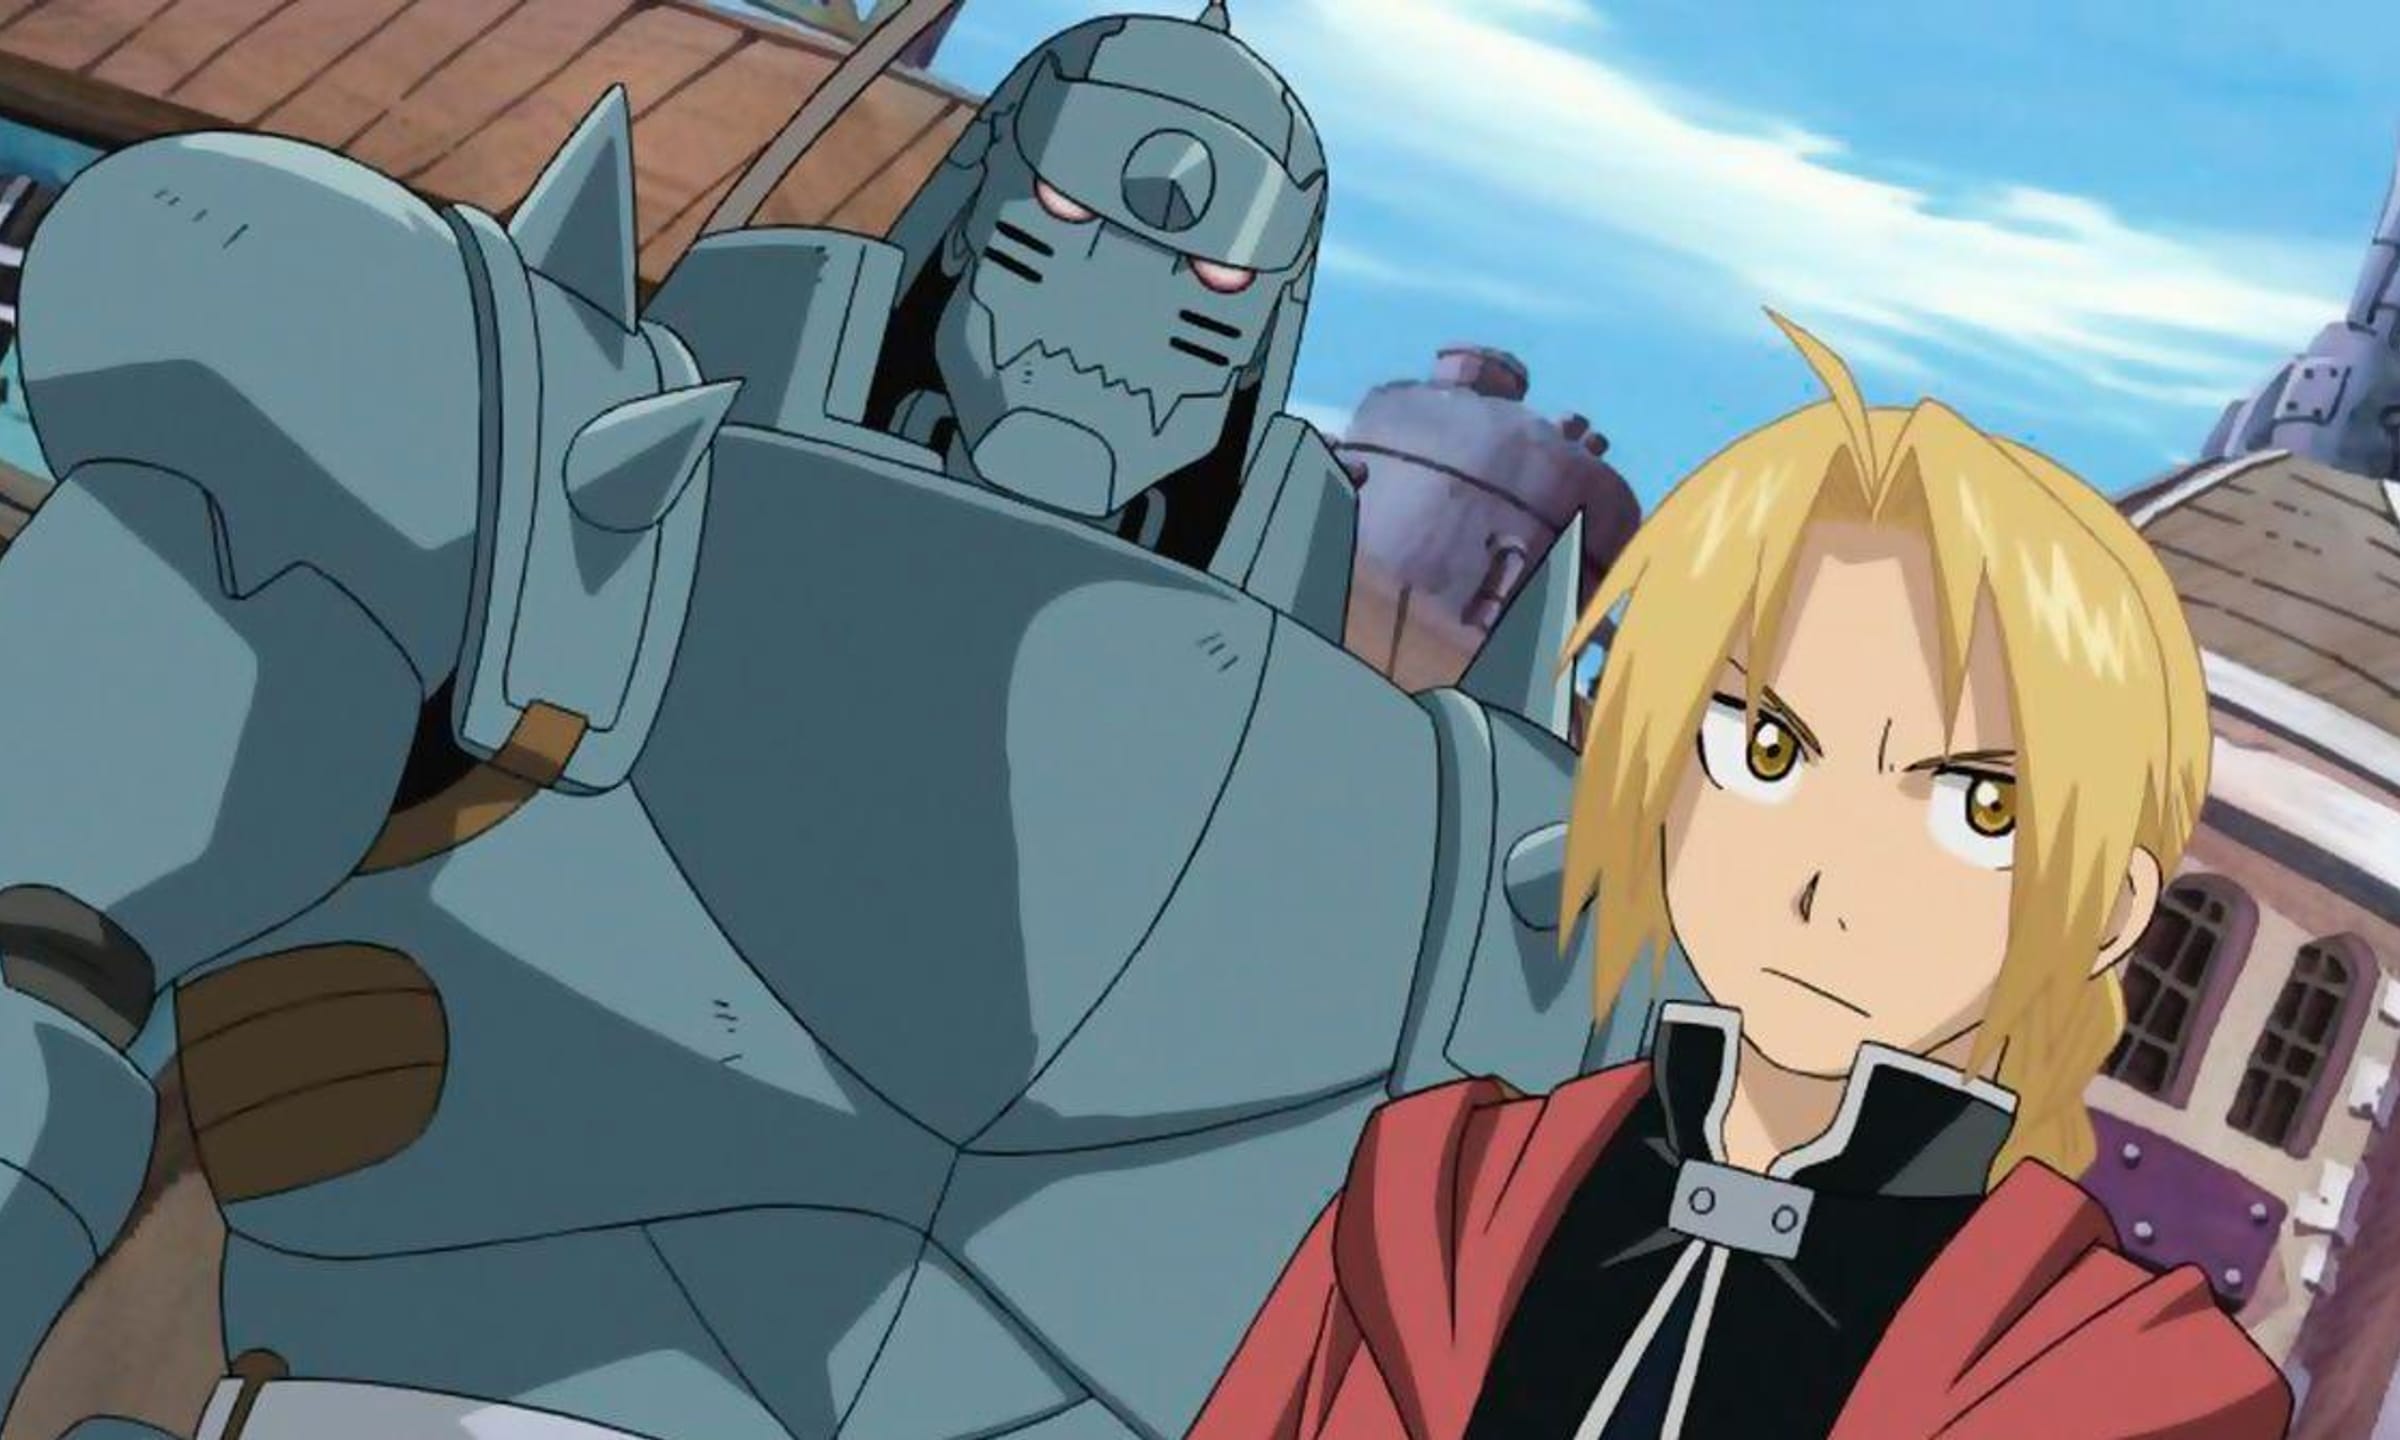 I just rewatched Fullmetal Alchemist Brotherhood and here are my